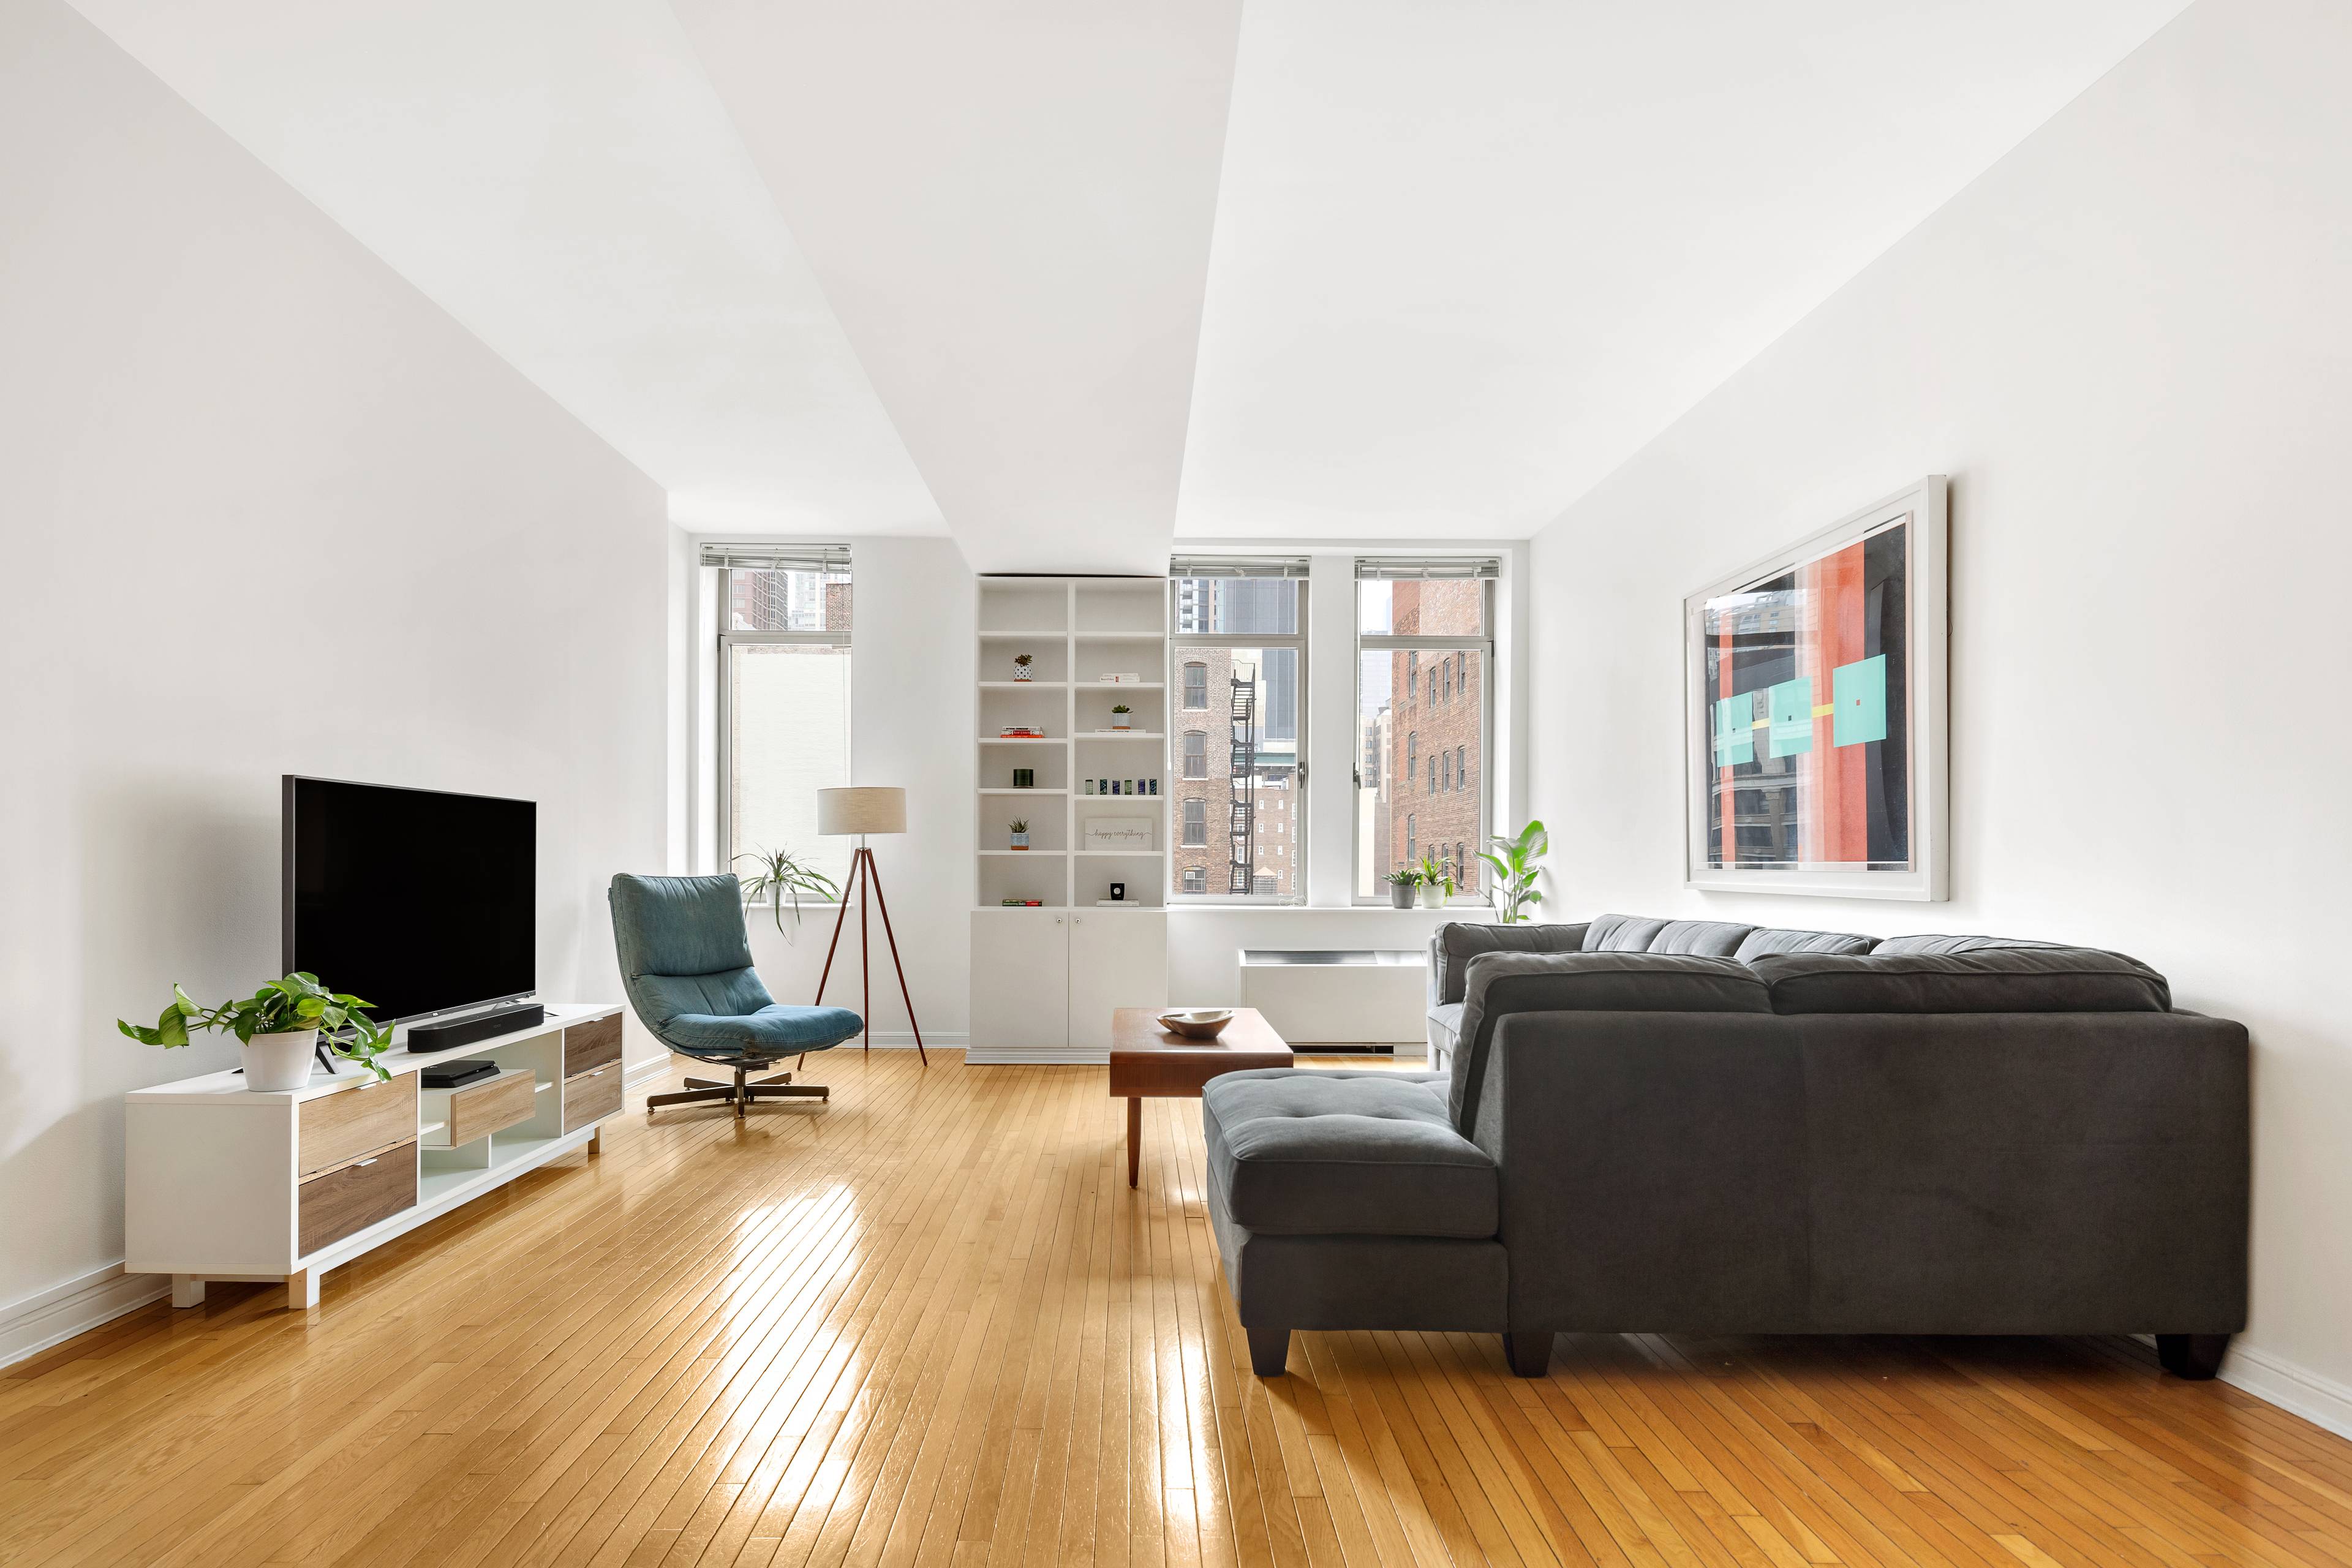 Full service loft living at the Chelsea Mercantile awaits you with this high floor, east facing K line featuring stunning, unobstructed morning light.